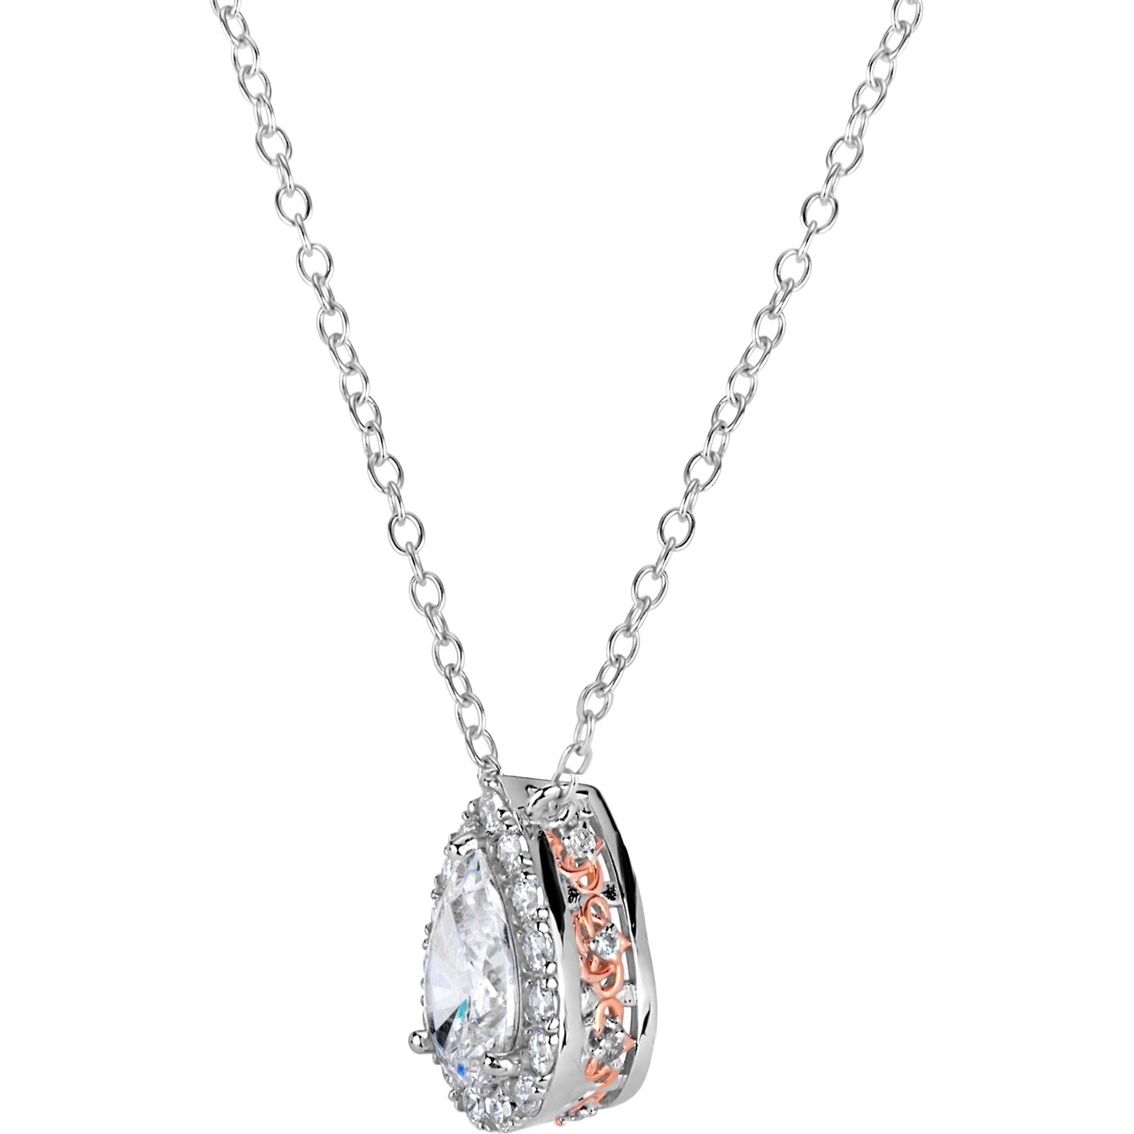 18K Rose Gold Over Sterling Silver Pear Shaped Cubic Zirconia Pendant - Image 2 of 2